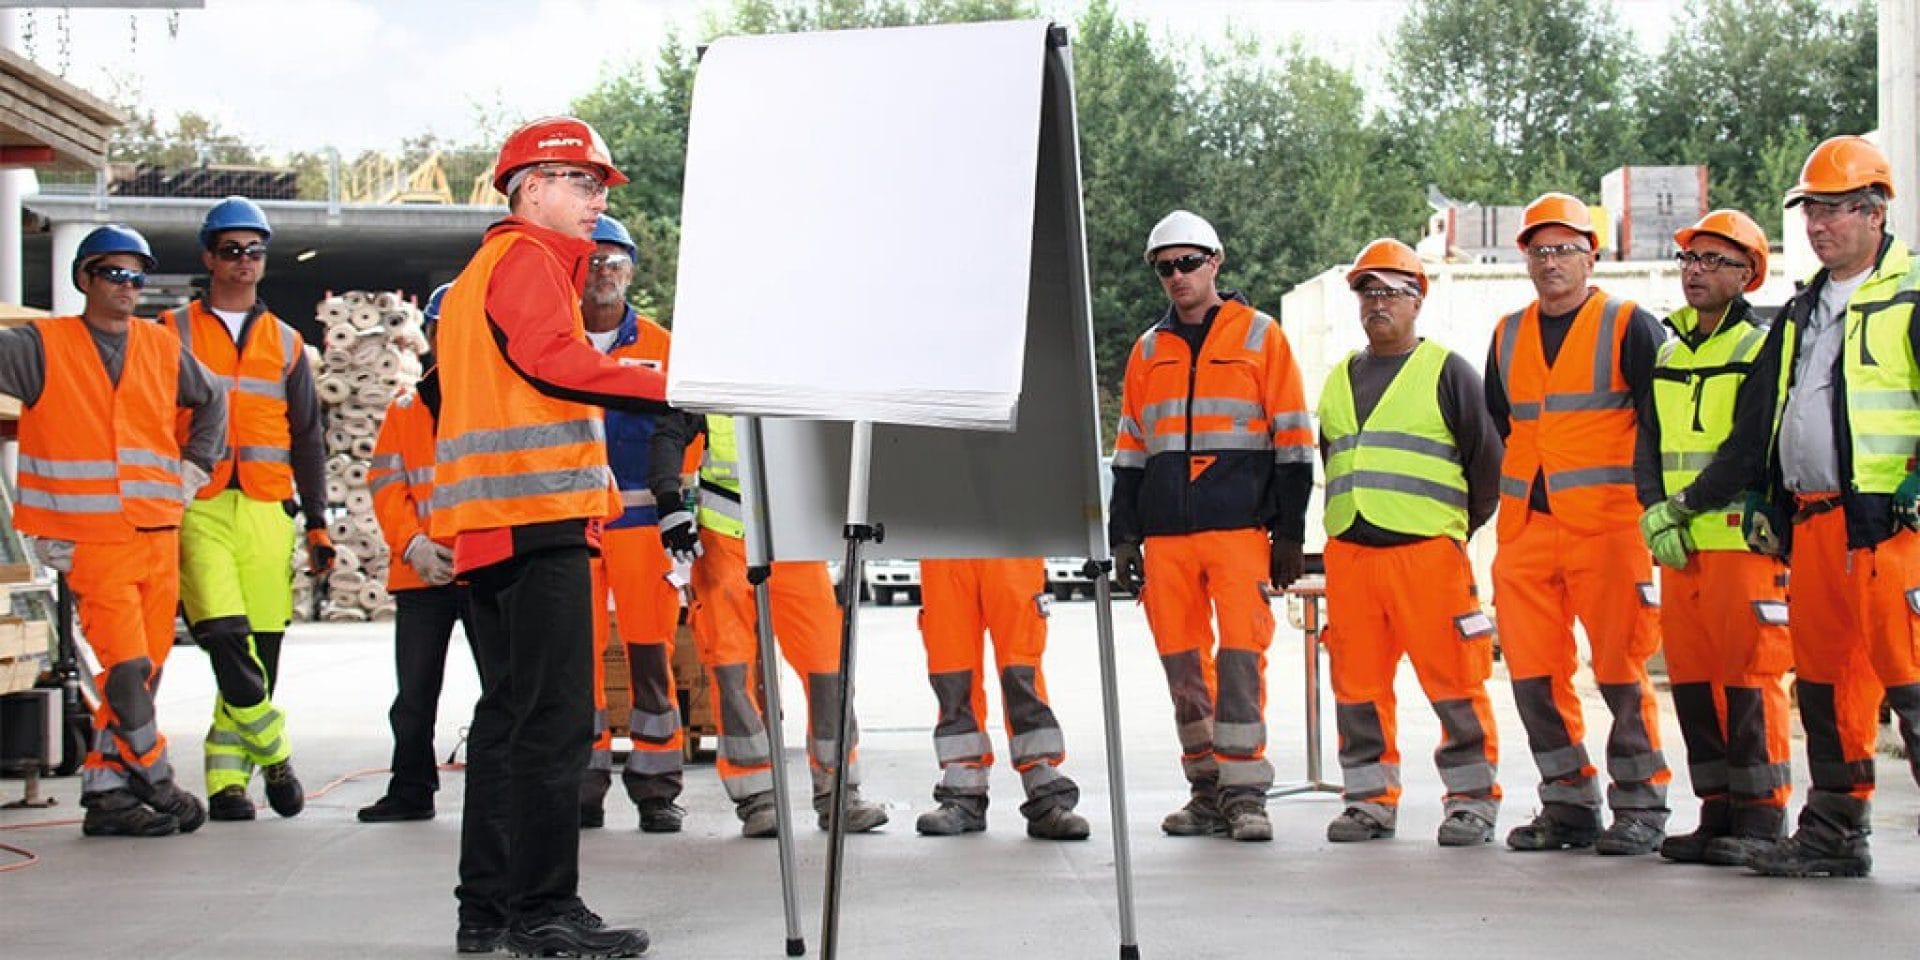 Hilti trained workers in heatlh and safety aspects